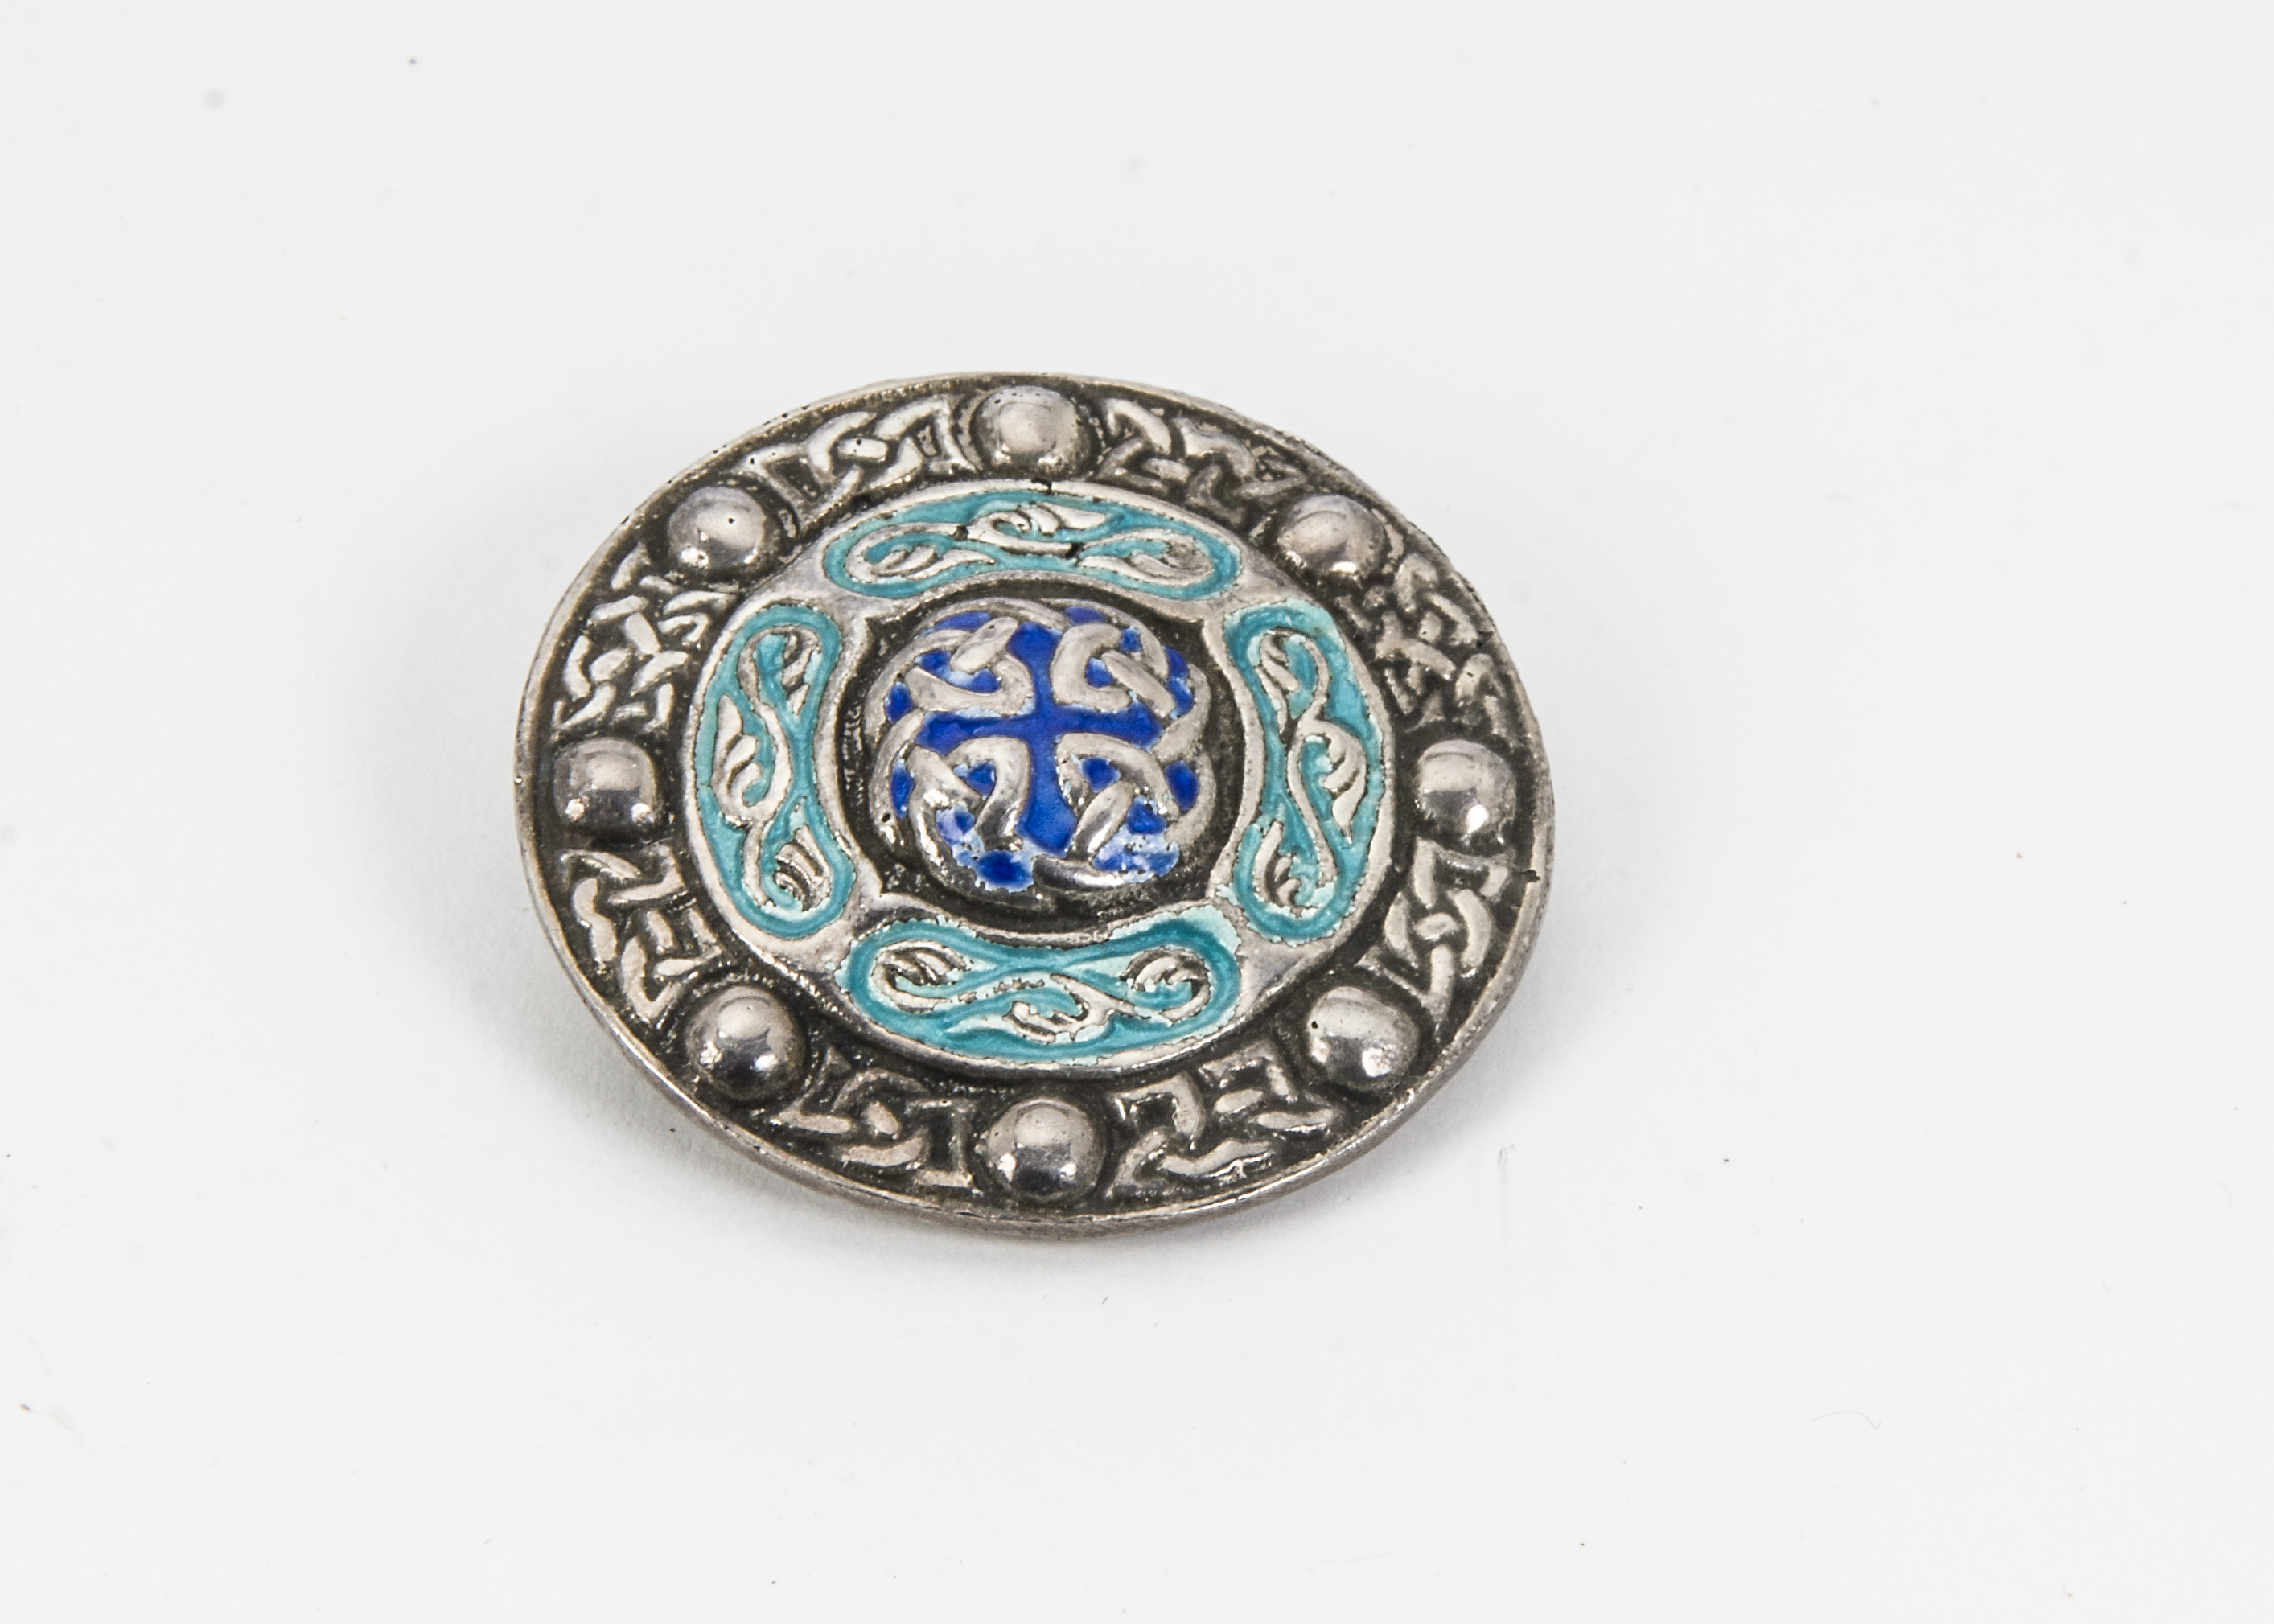 An early 20th Century silver and enamel brooch, shield shaped with Celtic motifs, Birmingham 1919 by